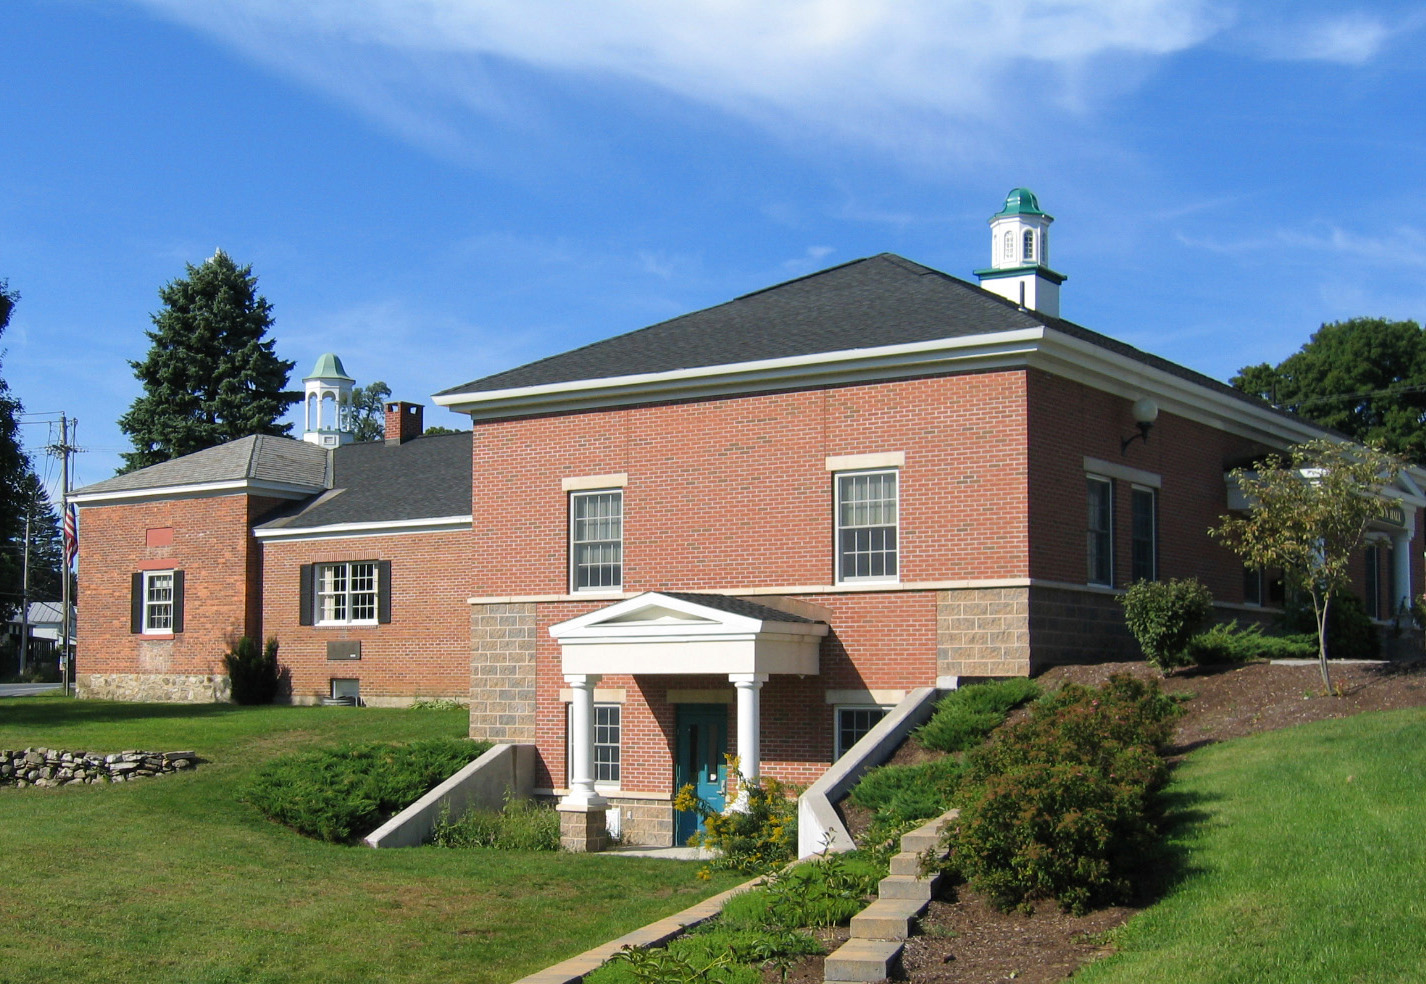 Greenfield Town Hall